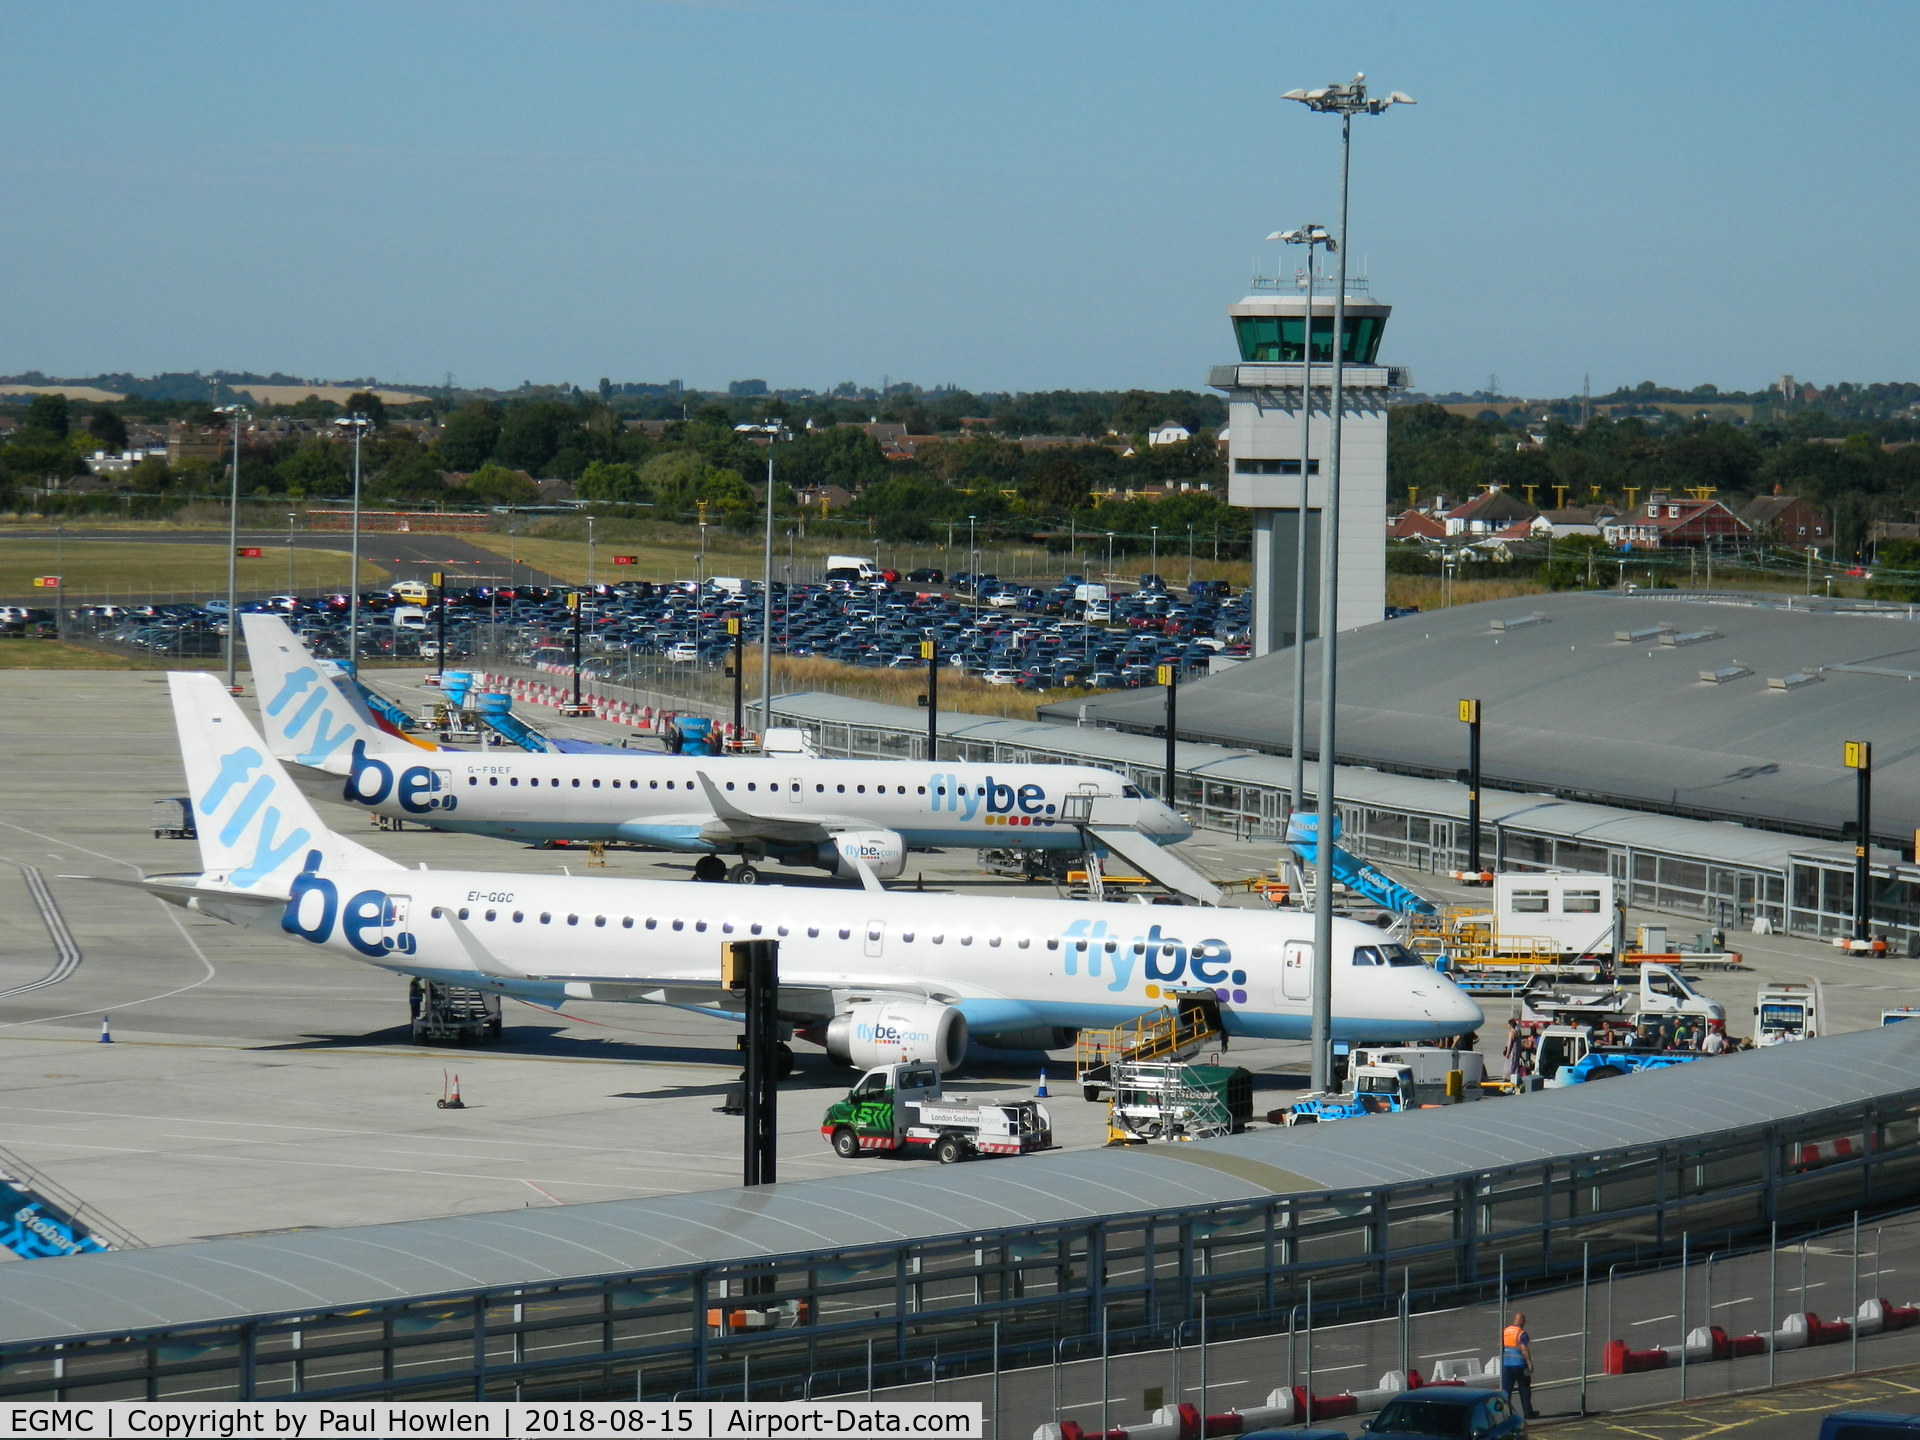 London Southend Airport, Southend-on-Sea, England United Kingdom (EGMC) - EI-GGC and G-FBEC of Flybe at stand on 15th August 2018 , taken from the Holiday Inn Hotel 